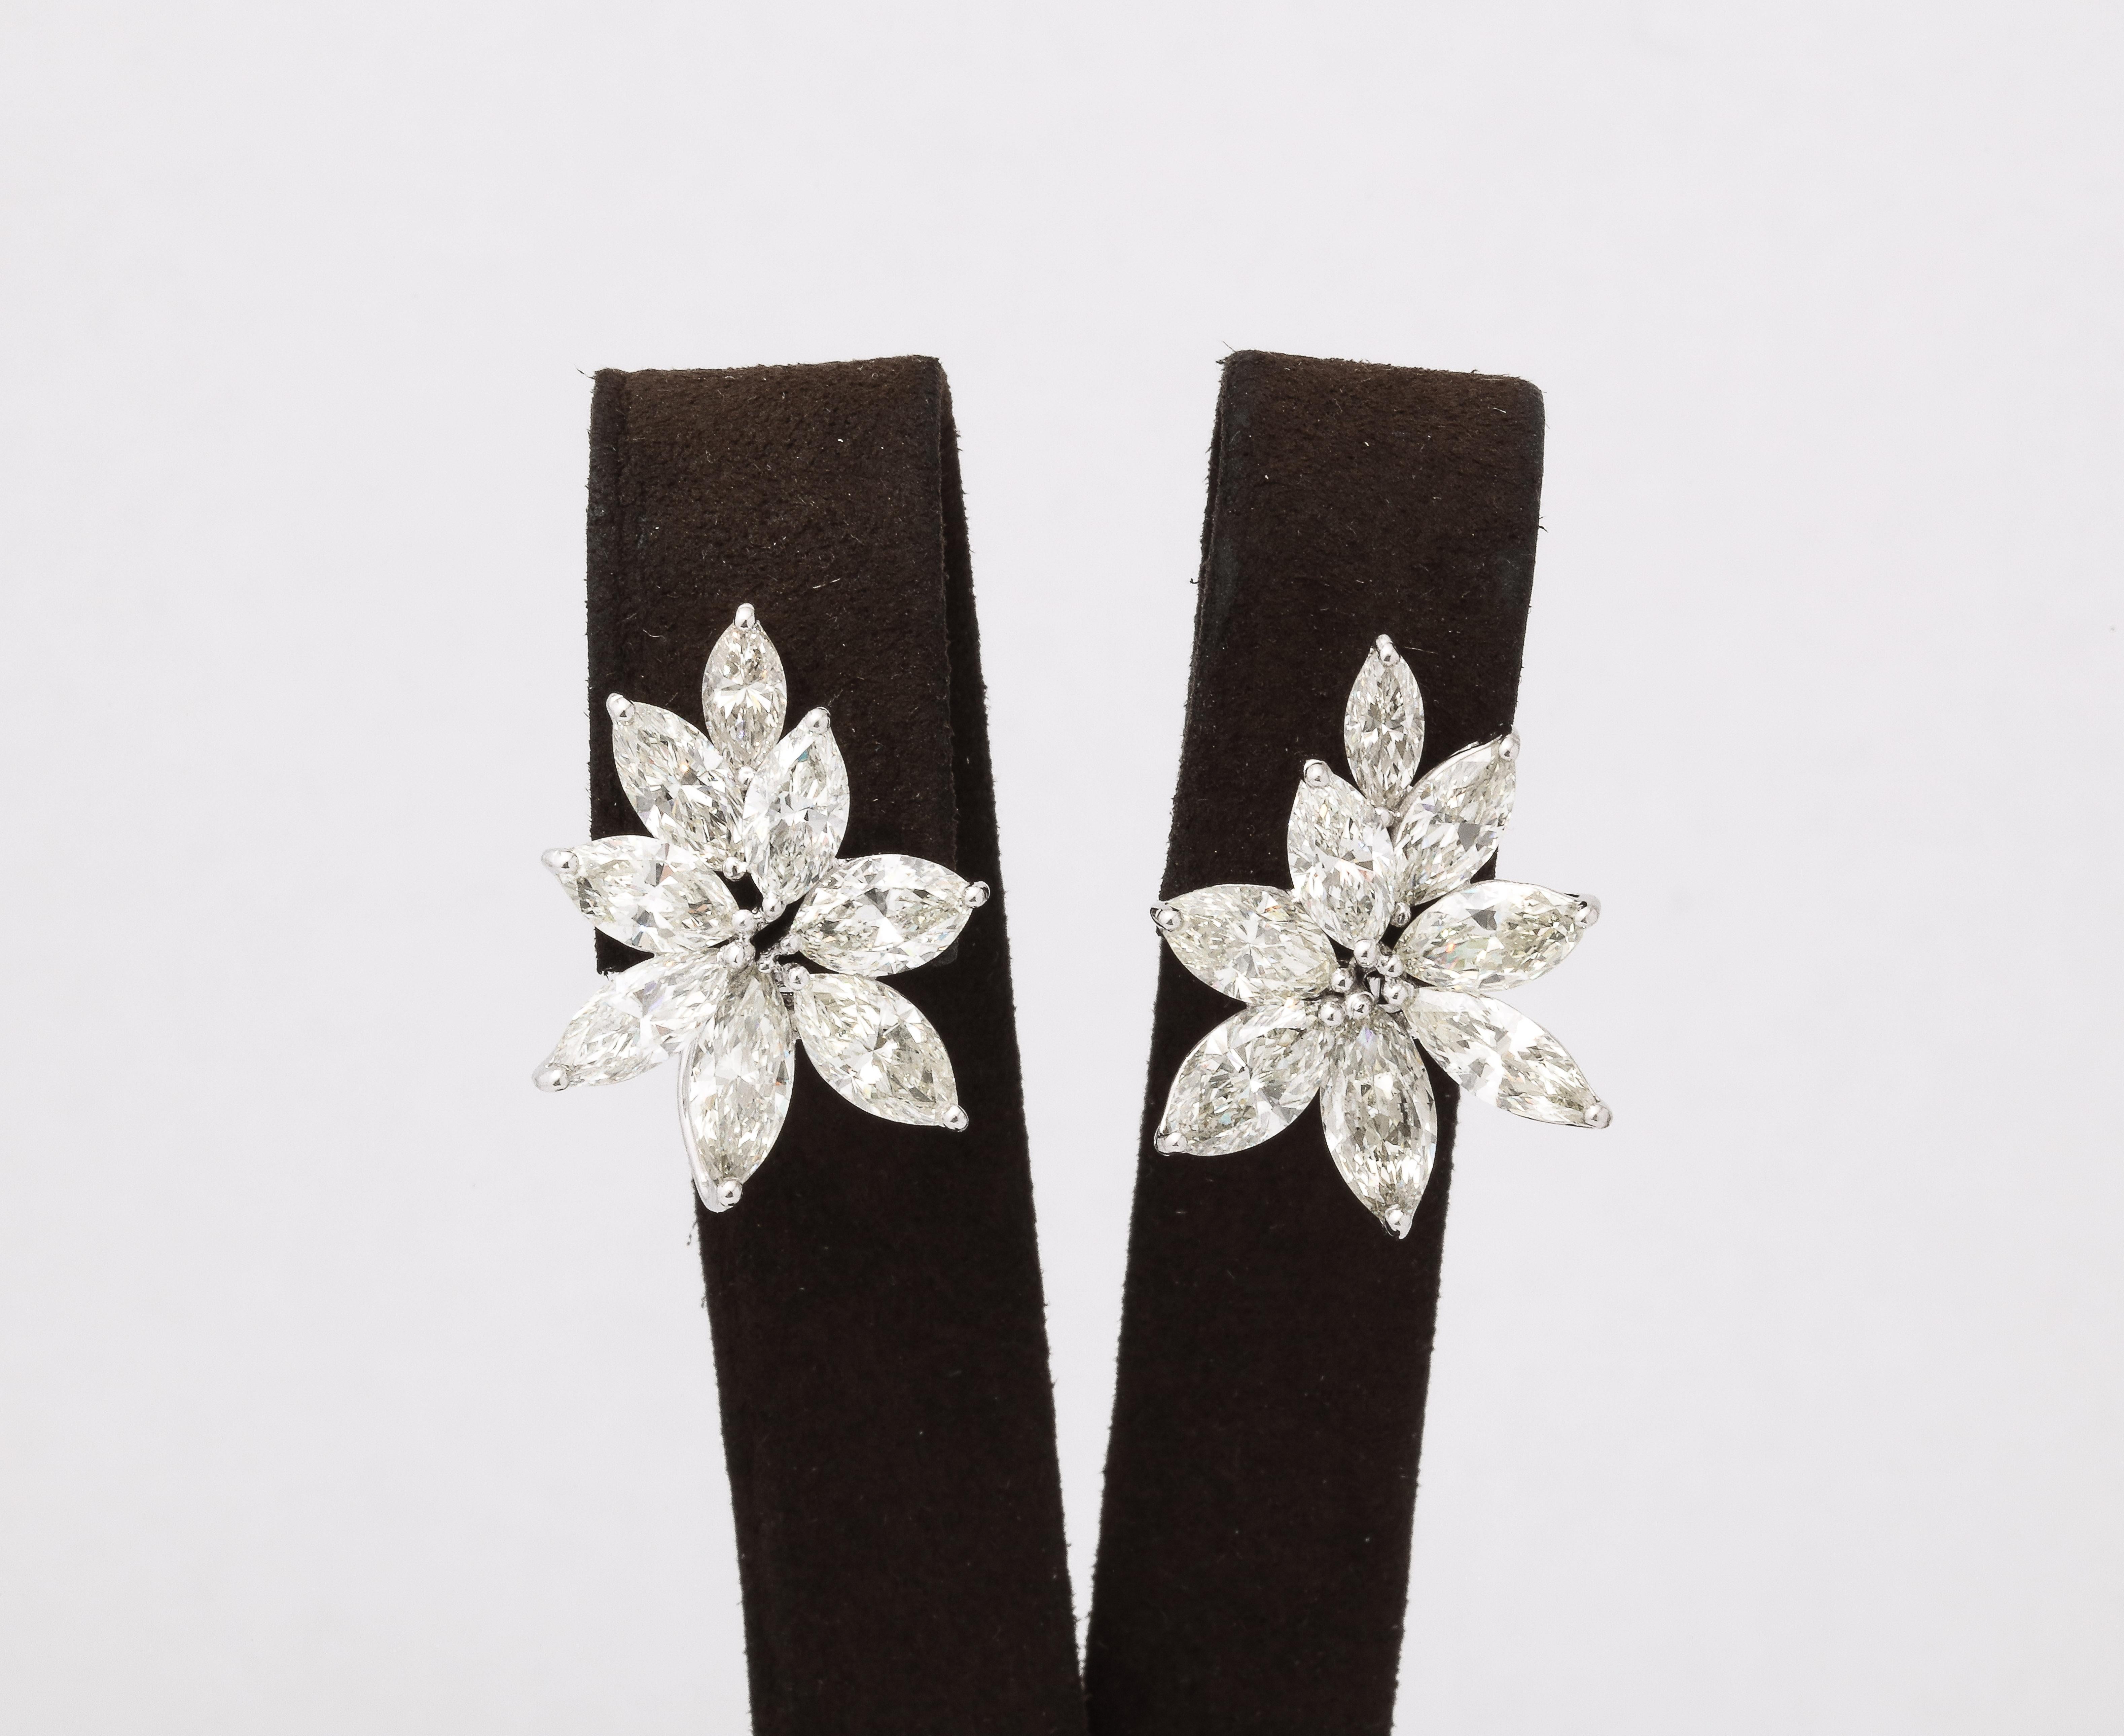 
A FABULOUS pair of cluster earrings!

10.52 carats of white, Marquise cut Diamonds set in platinum. 

Approximately 1 inch long from the highest to lowest points — 3/4 or an inch wide. 